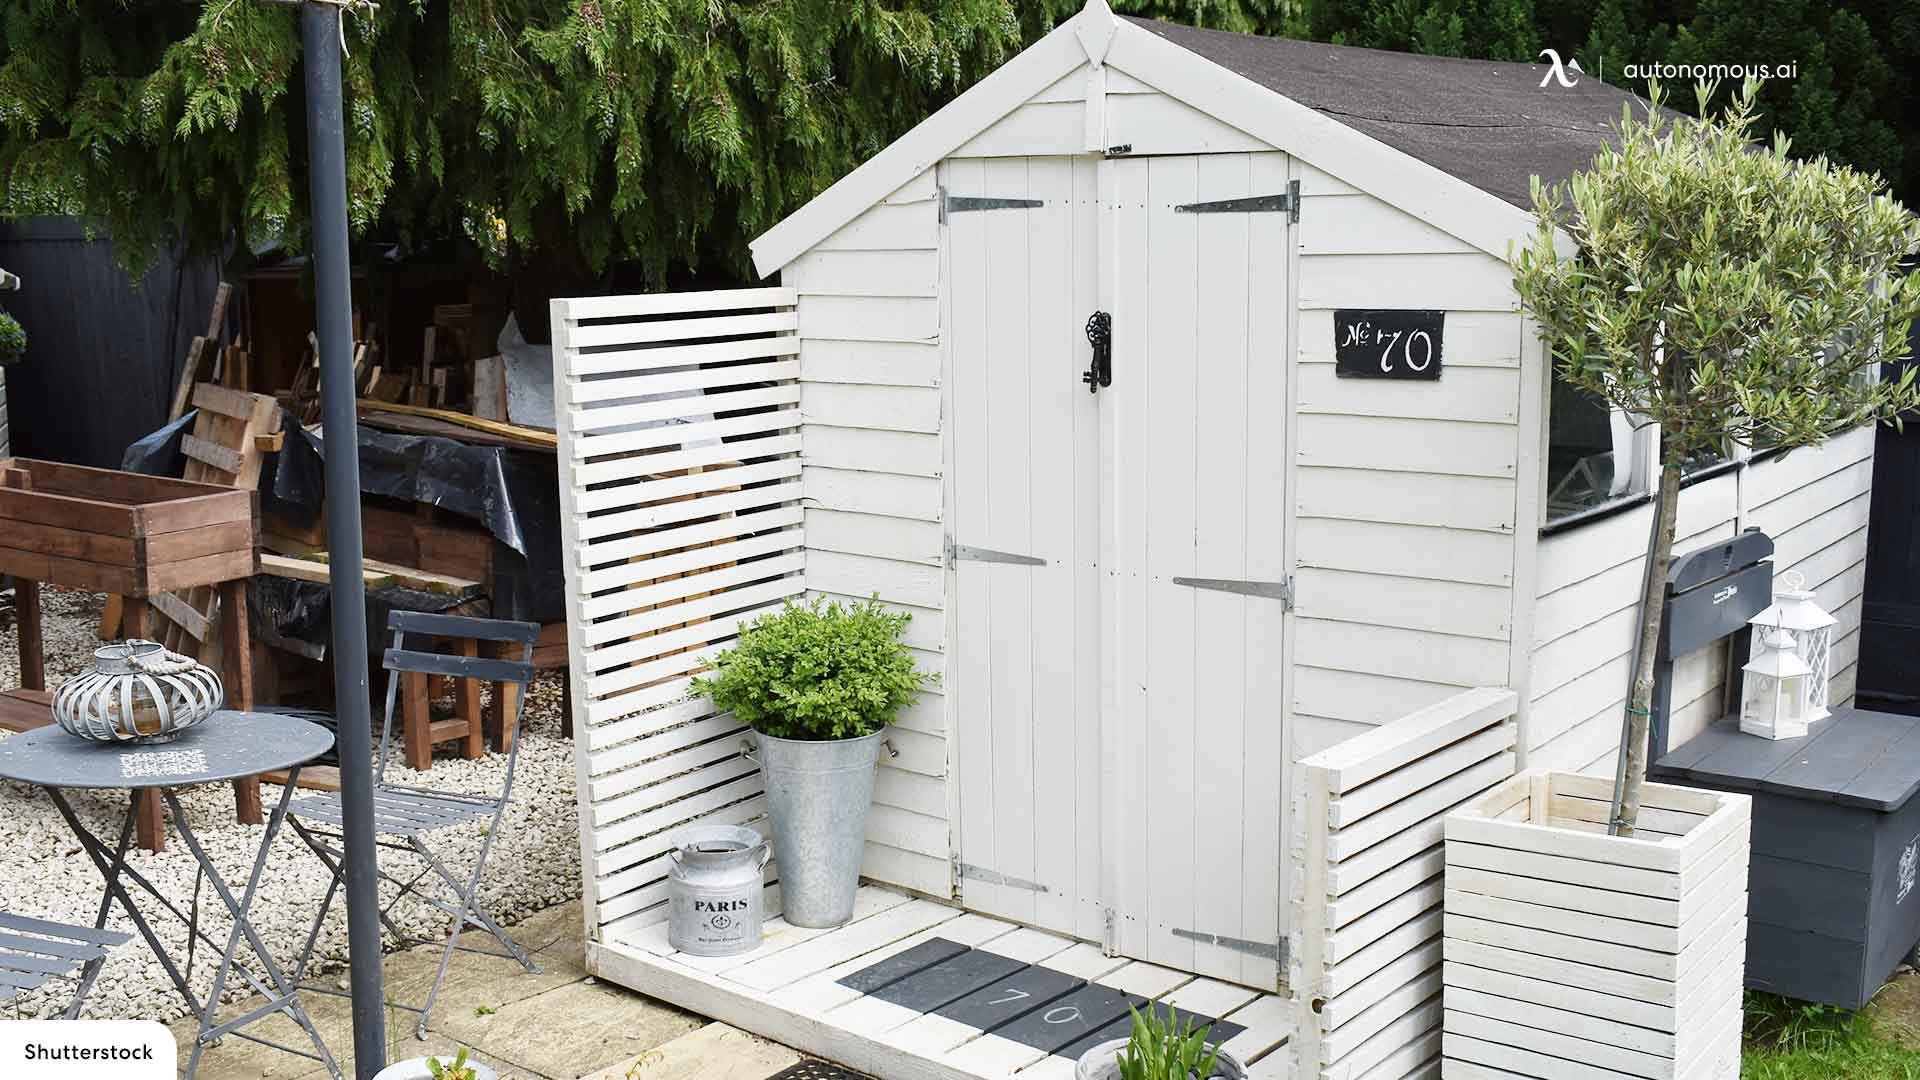 15 Perfect Outdoor Office Sheds & Pods for Working at Home